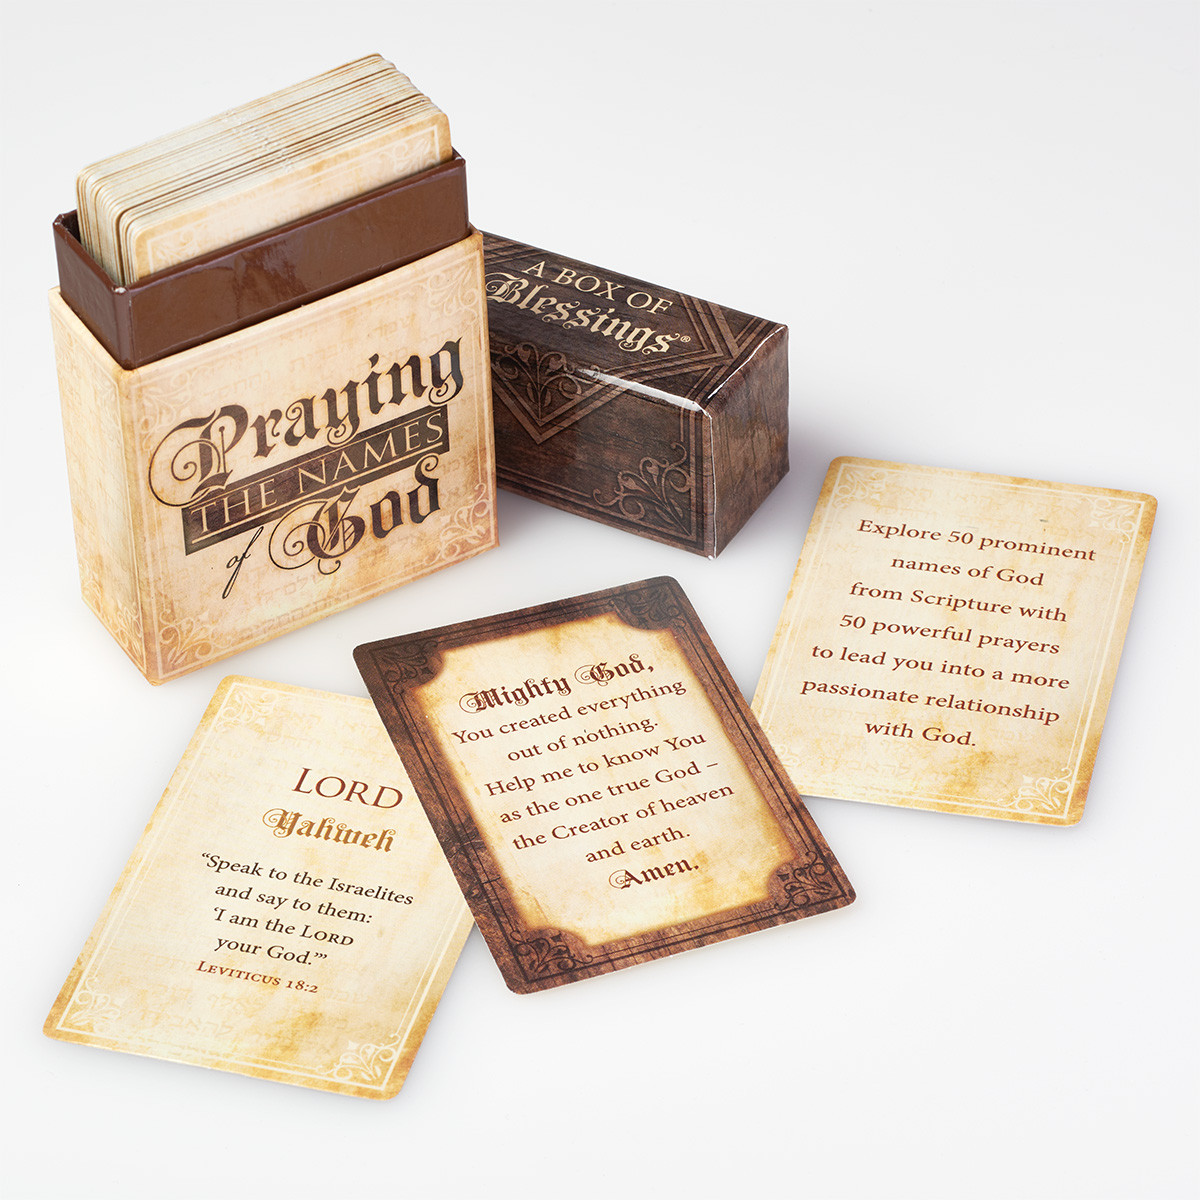 Box of Blessing: Praying the Names of God